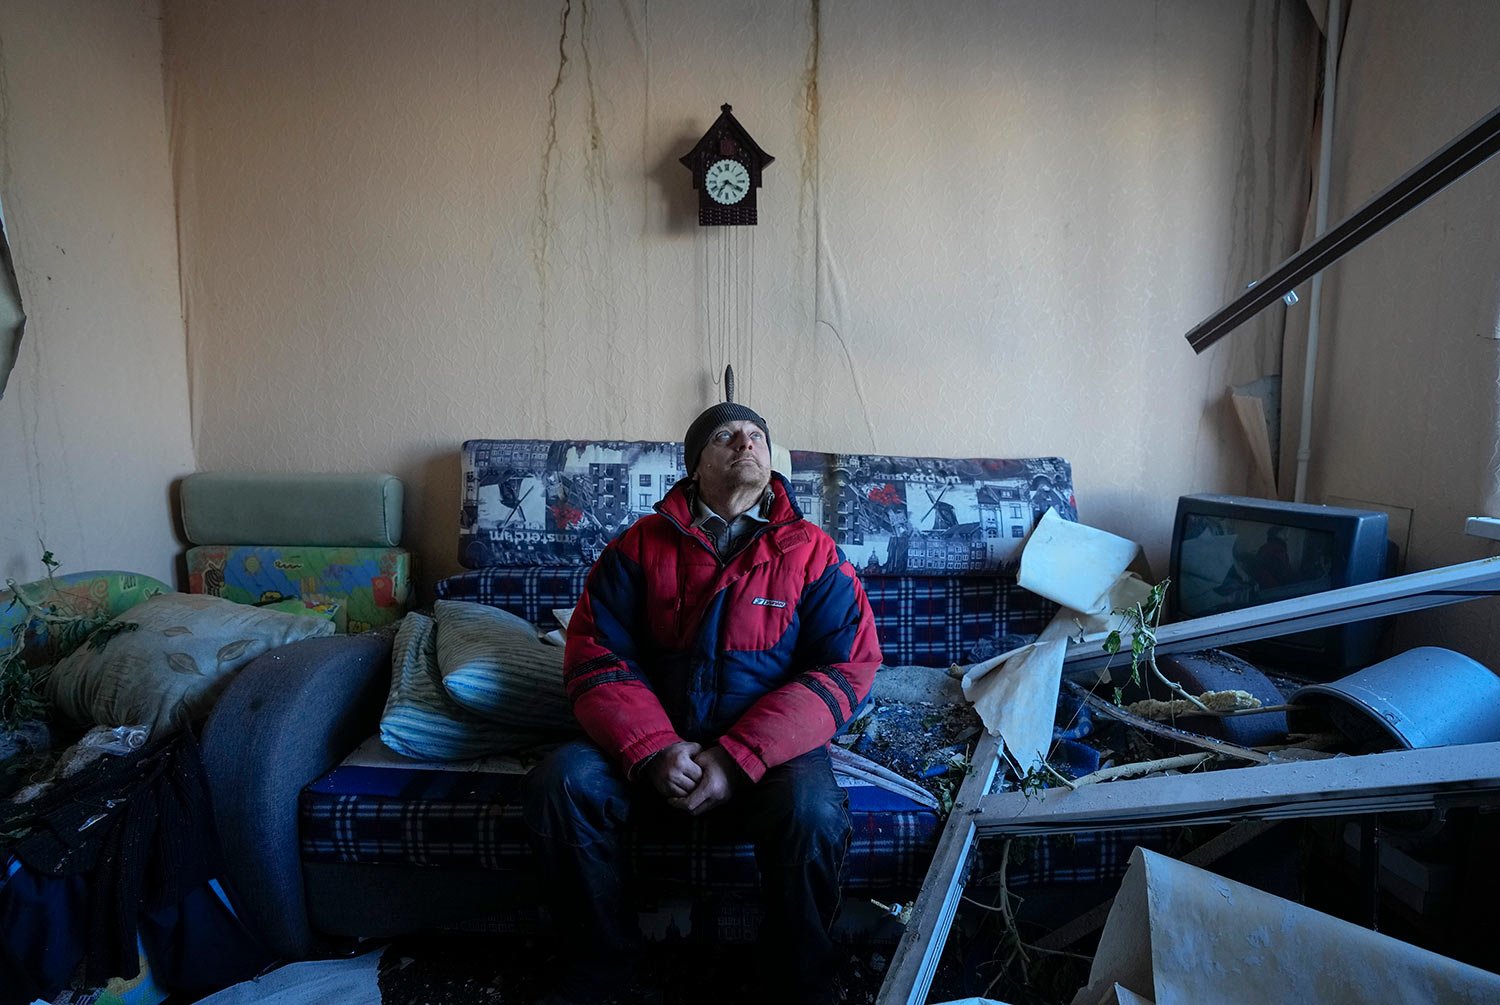  A man looks up as he sits in his apartment in a multi-story house destroyed by a Russian attack in Kharkiv, Ukraine, Thursday, March 24, 2022.  (AP Photo/Efrem Lukatsky) 